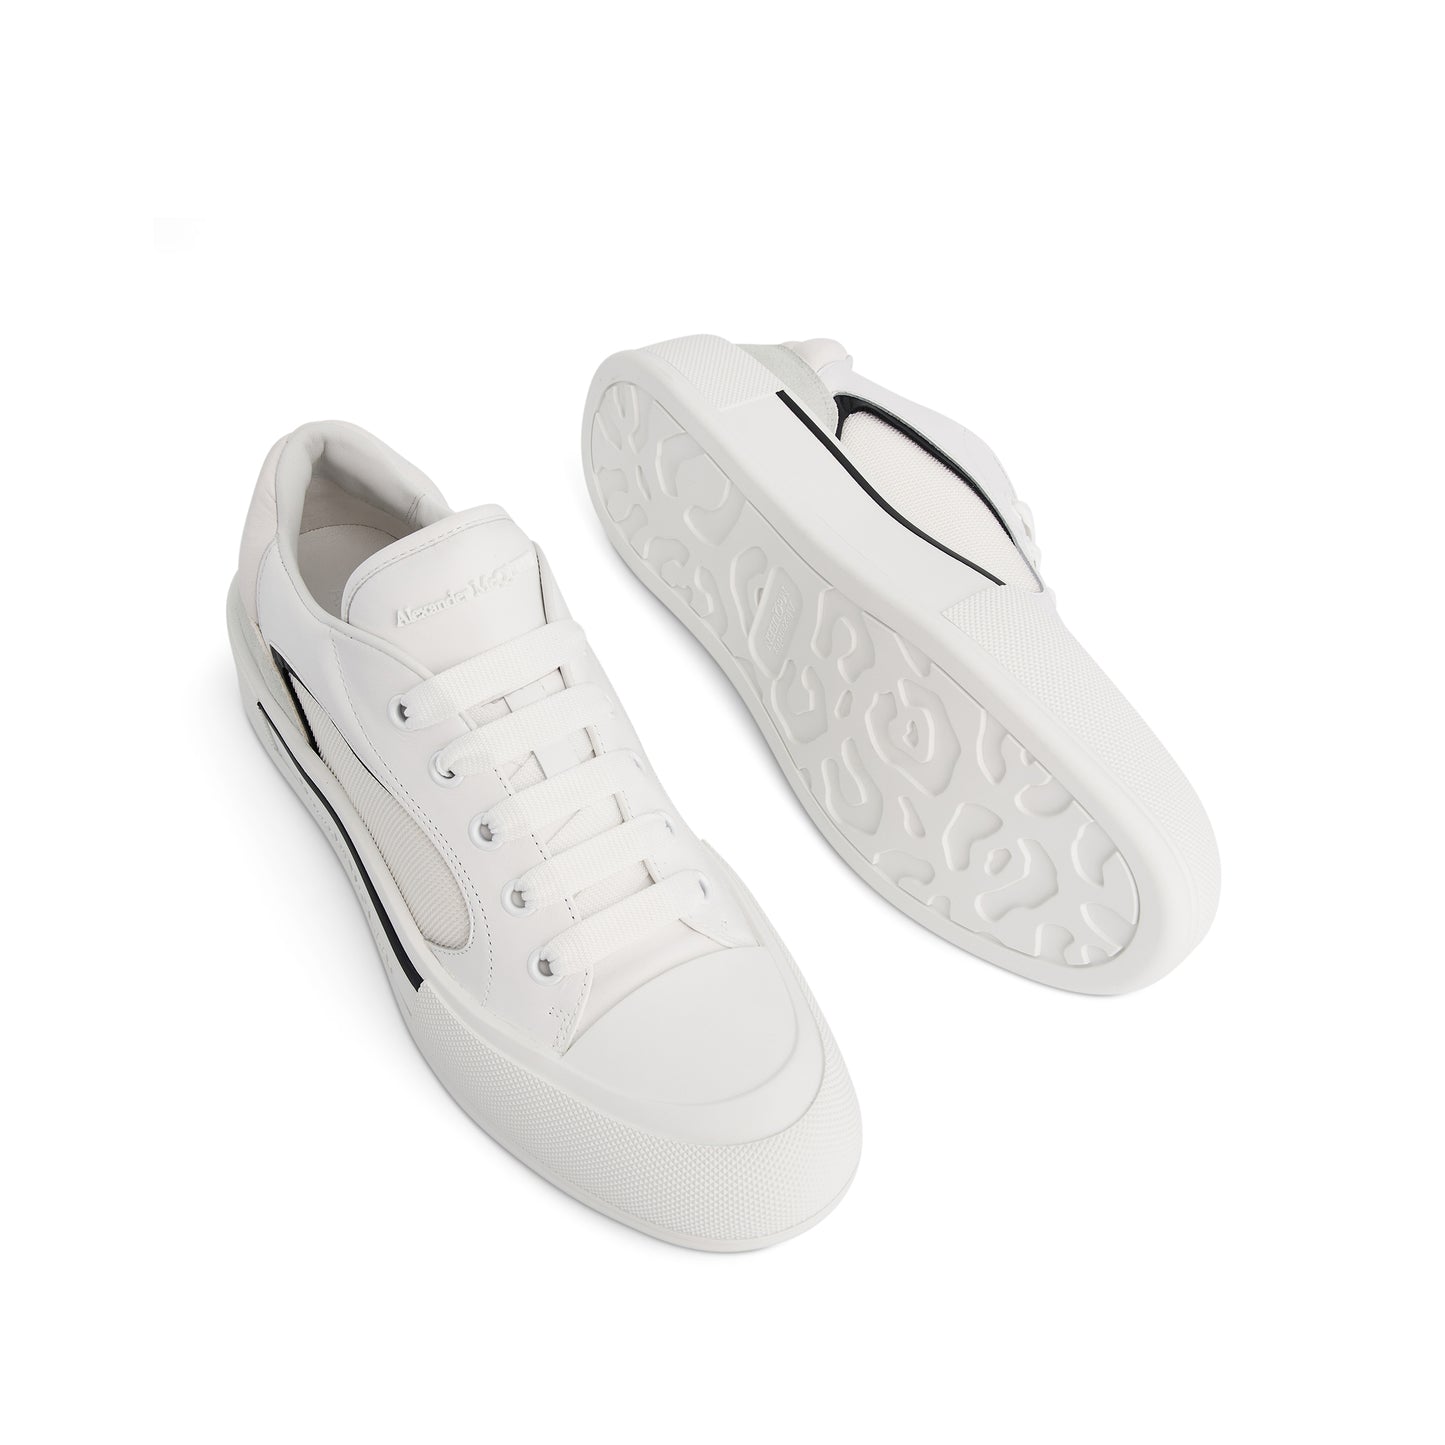 New Deck Lace-Up Plimsoll Sneaker in White/Black